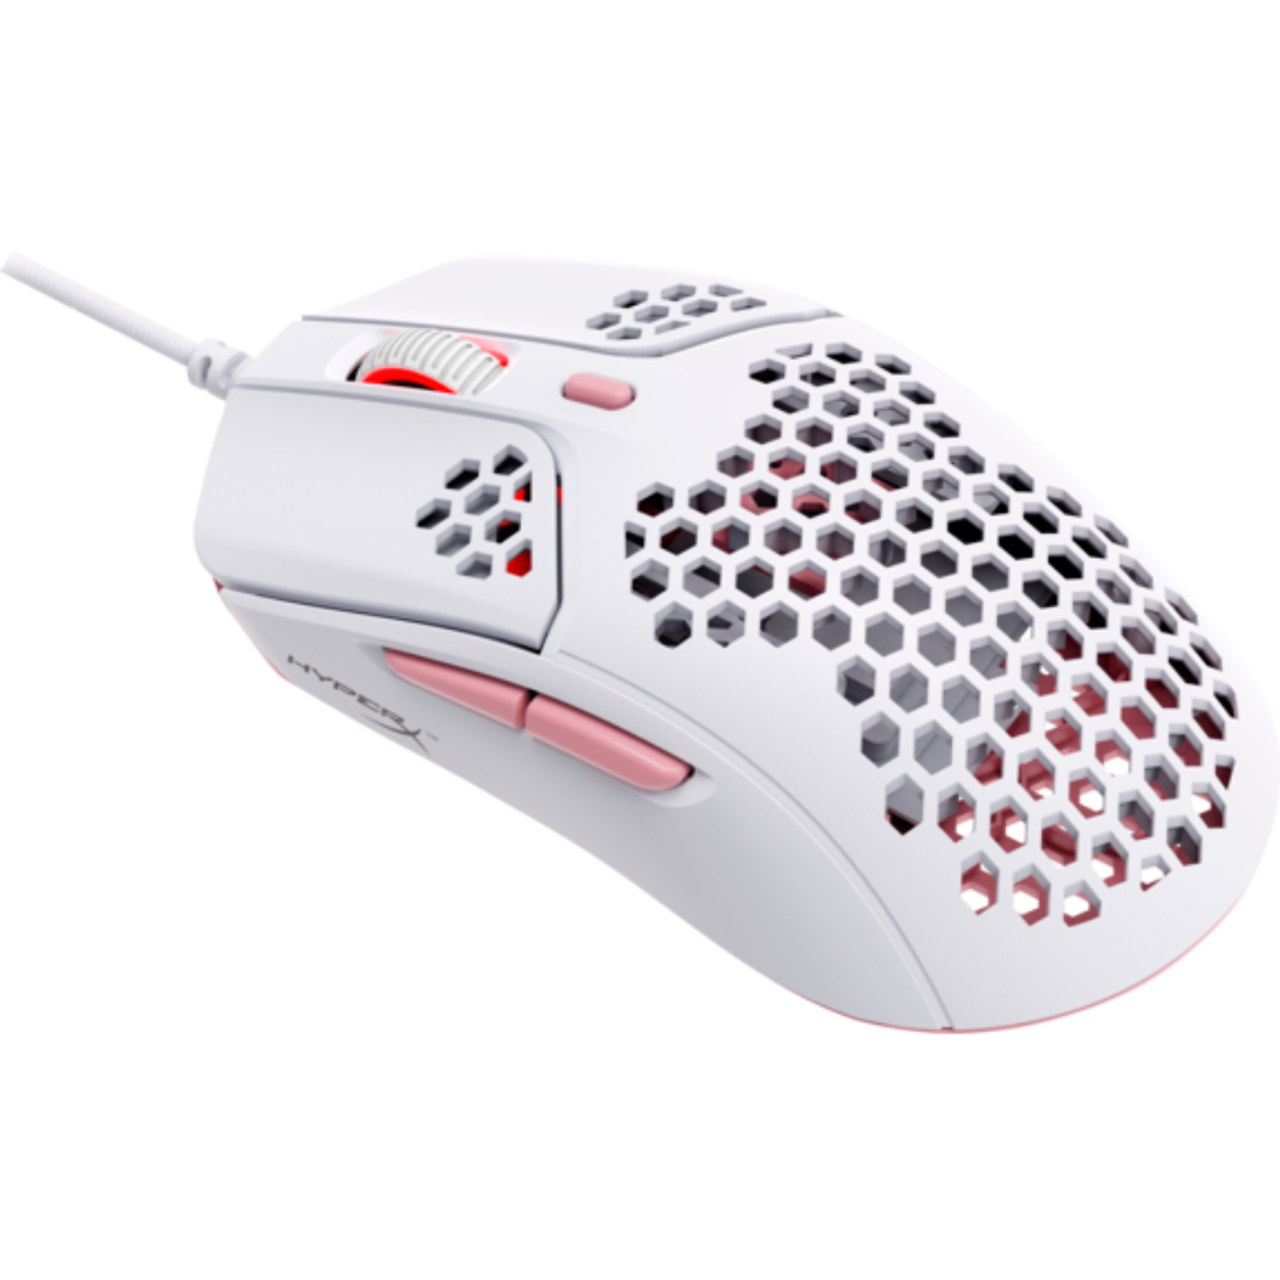 HP HyperX Pulsefire Haste Wireless Gaming Mouse, souris gamer